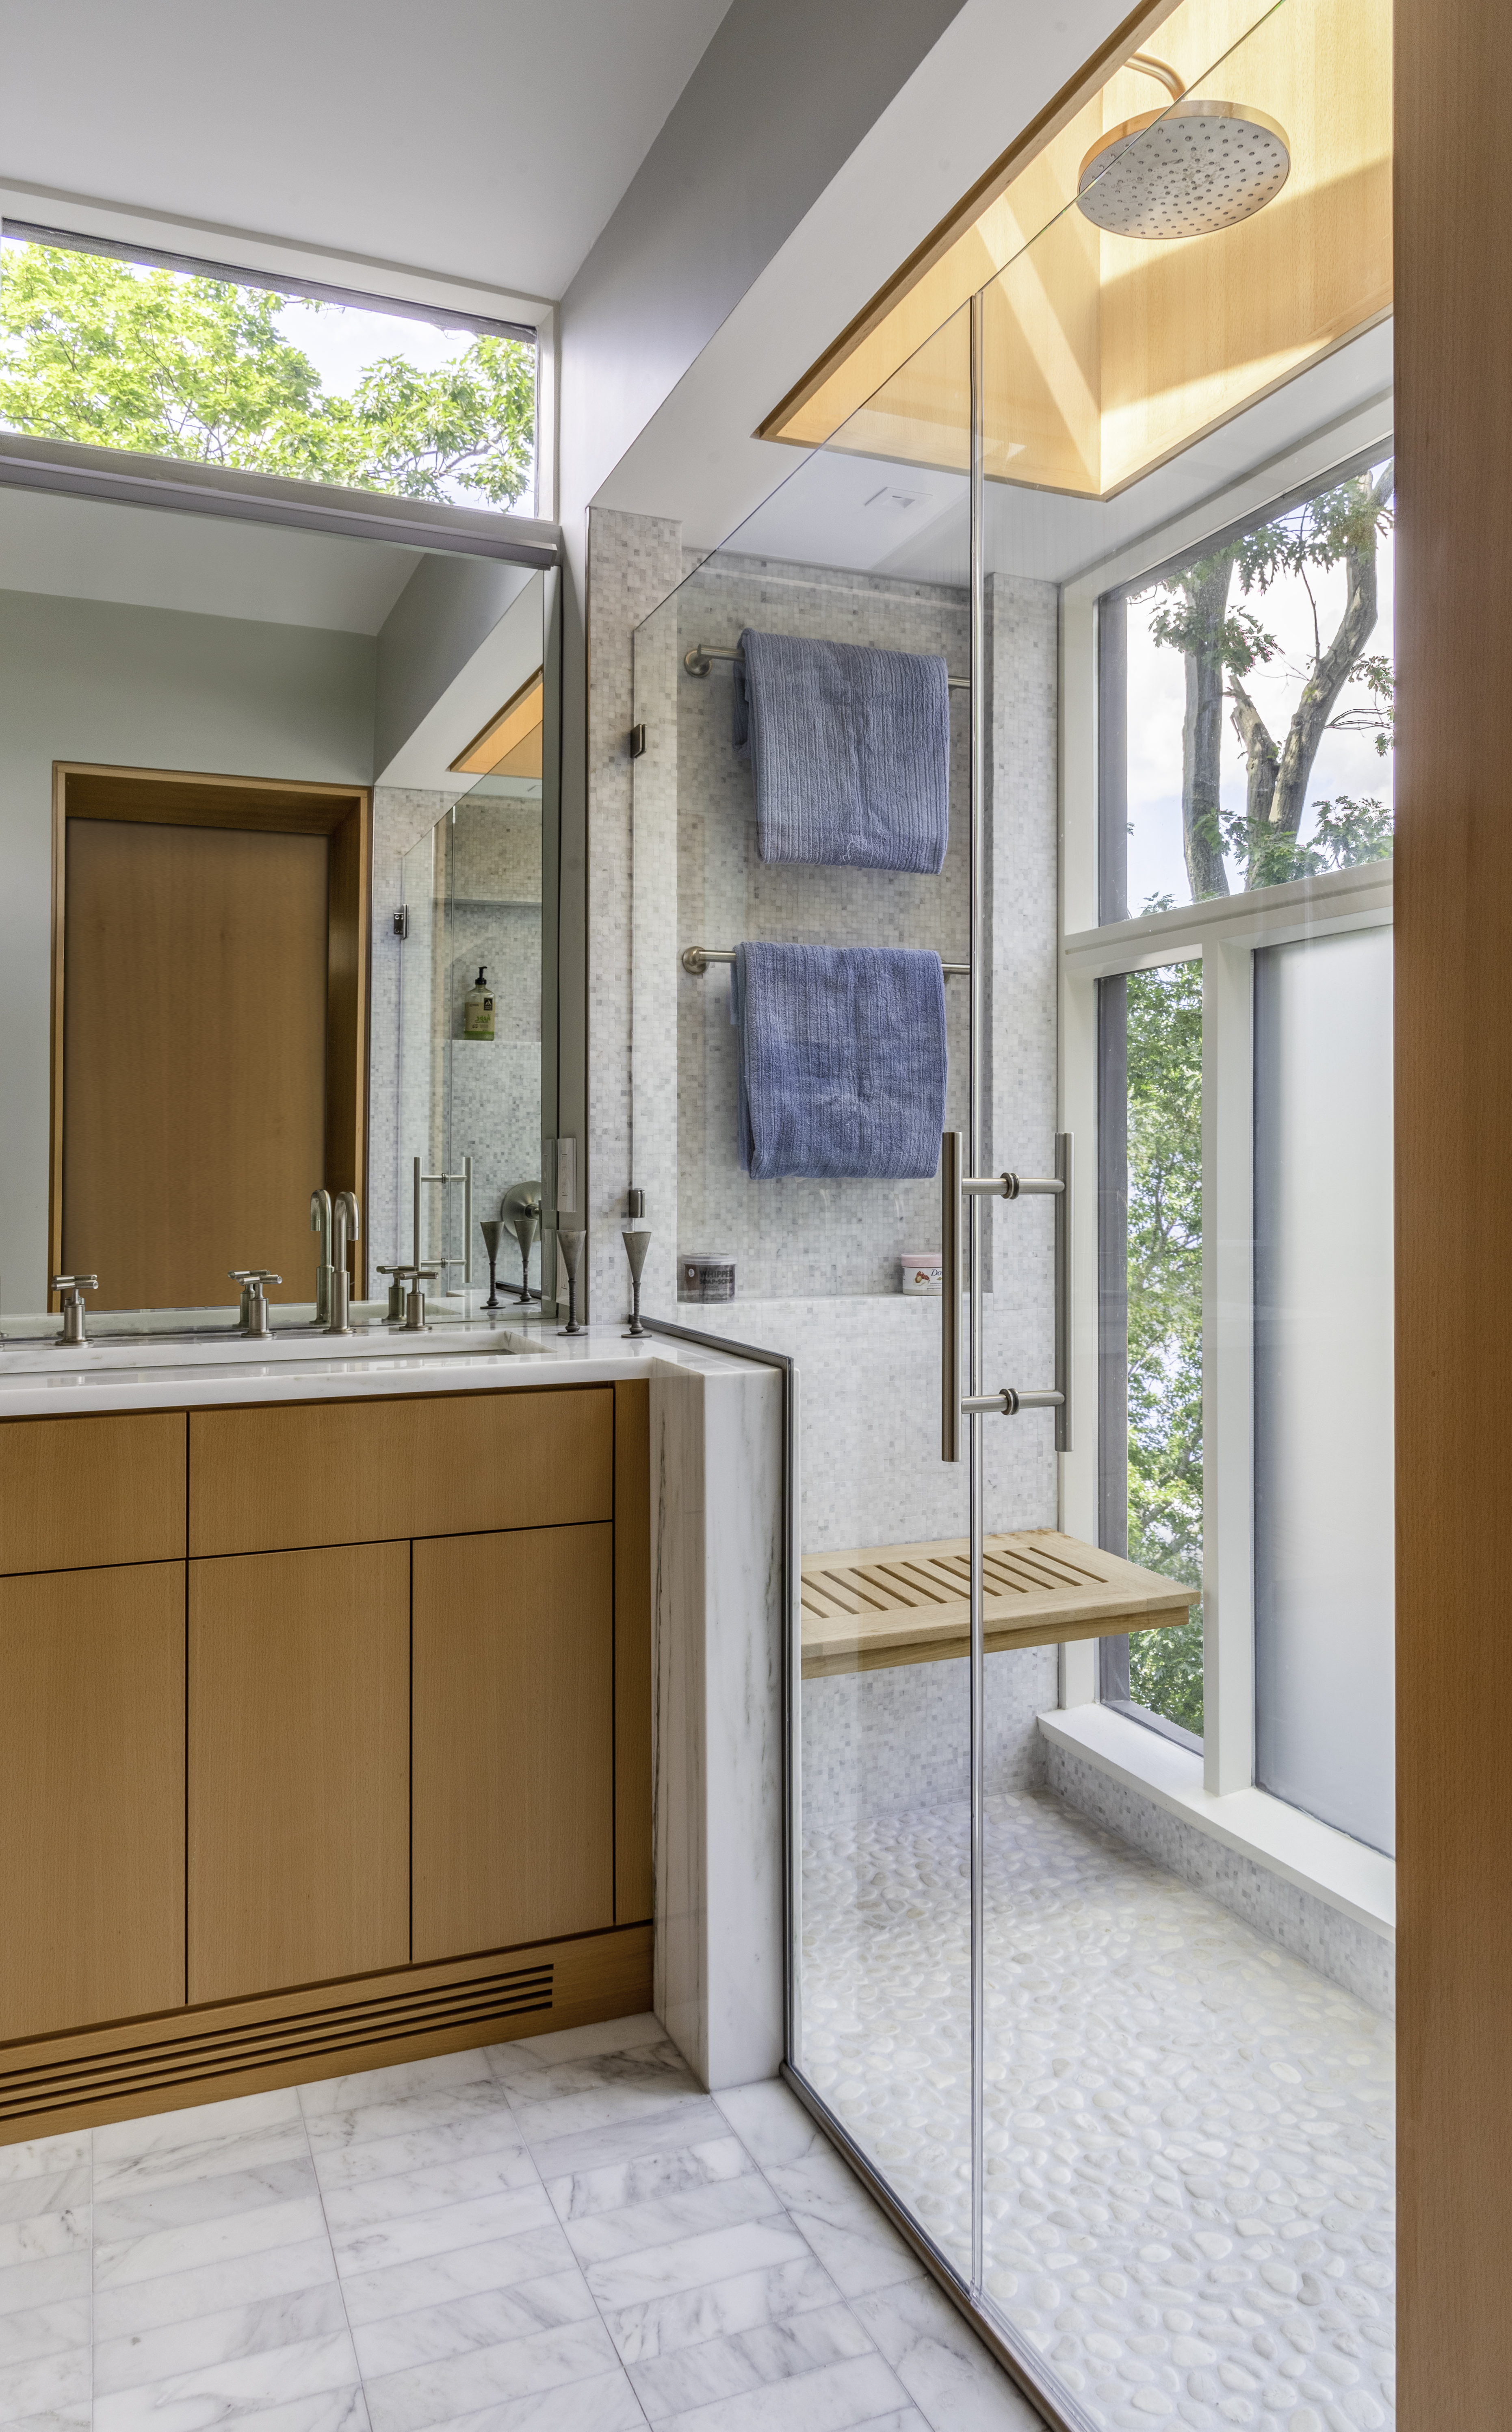 A shower with a wall of glass and an operable skylight helps bring light and air into this primary bath's shower.